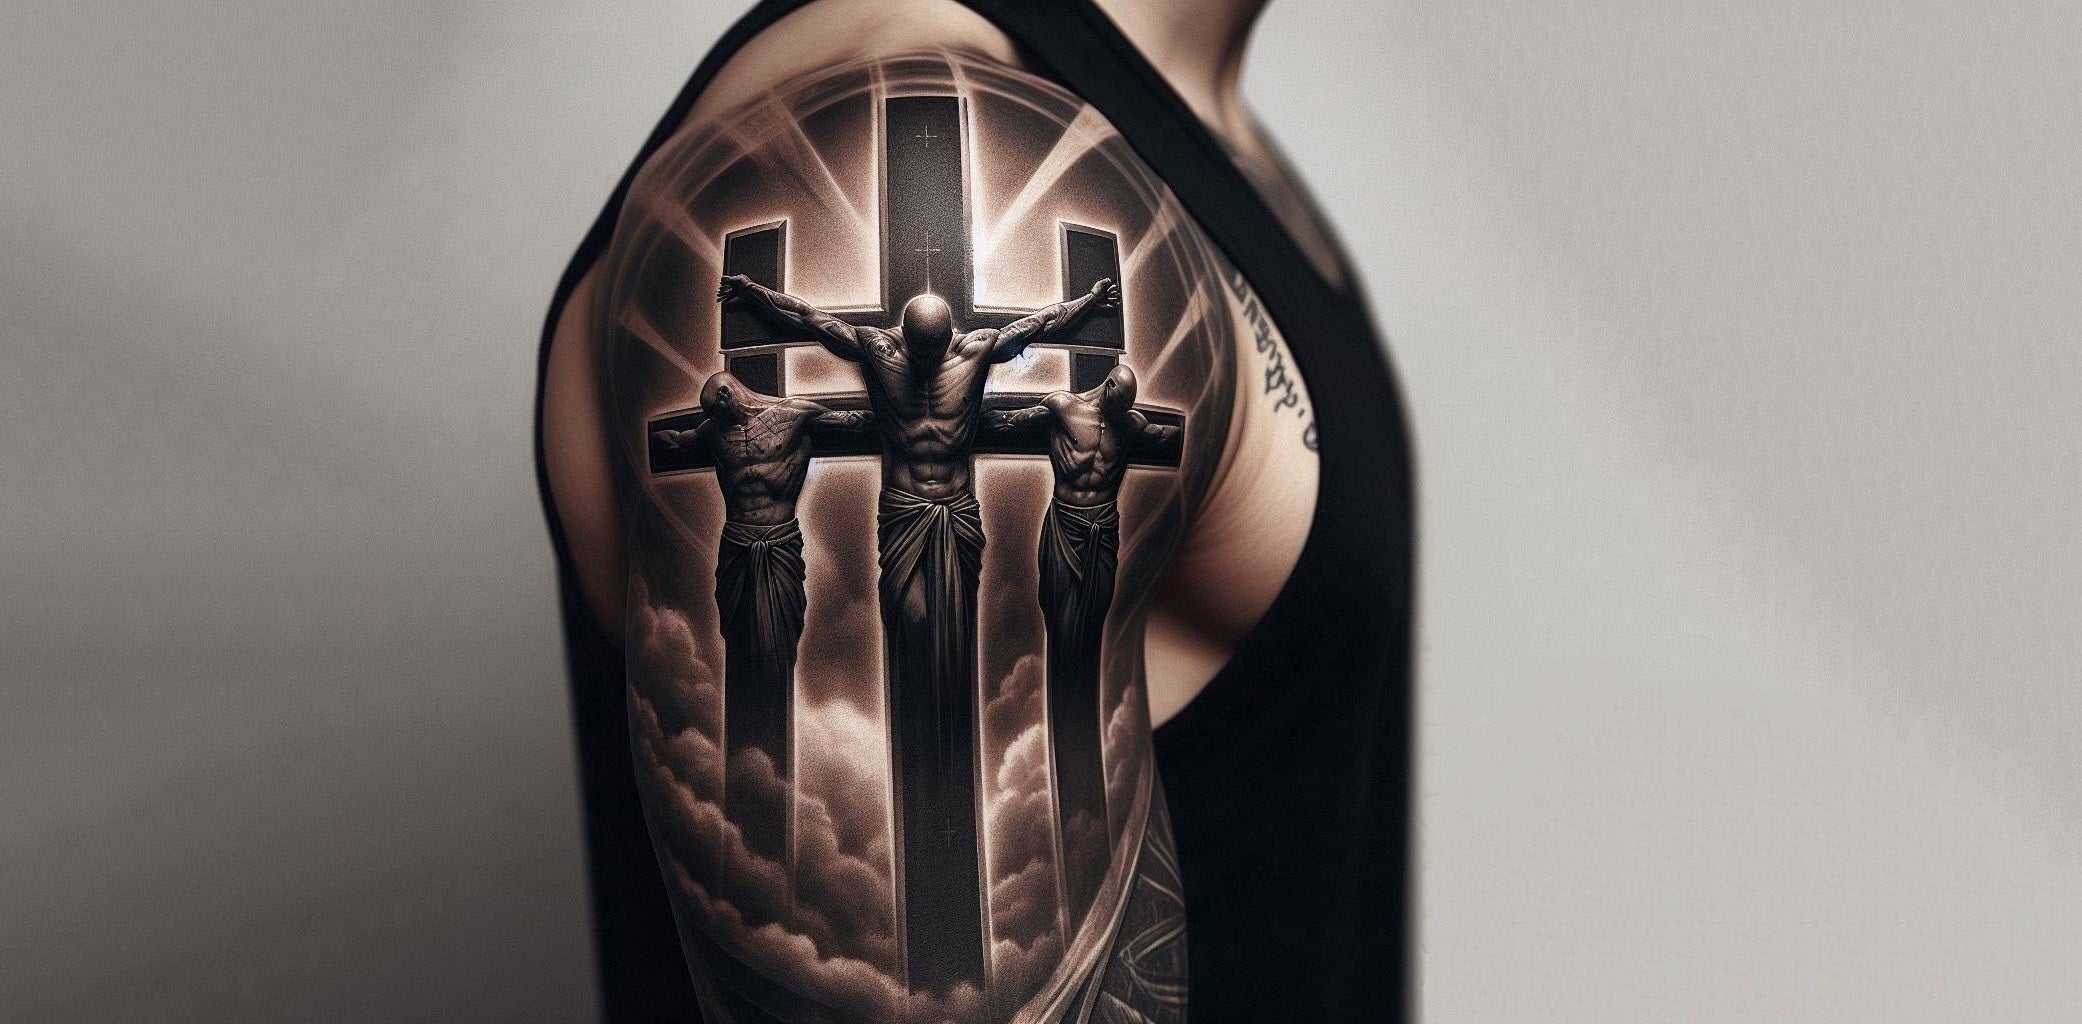 Cross Tattoos - Meaningful Cross Tattoo Ideas for Everyone | PositiveFox | Cross  tattoos for women, Cross tattoo designs, Cross tattoo for men